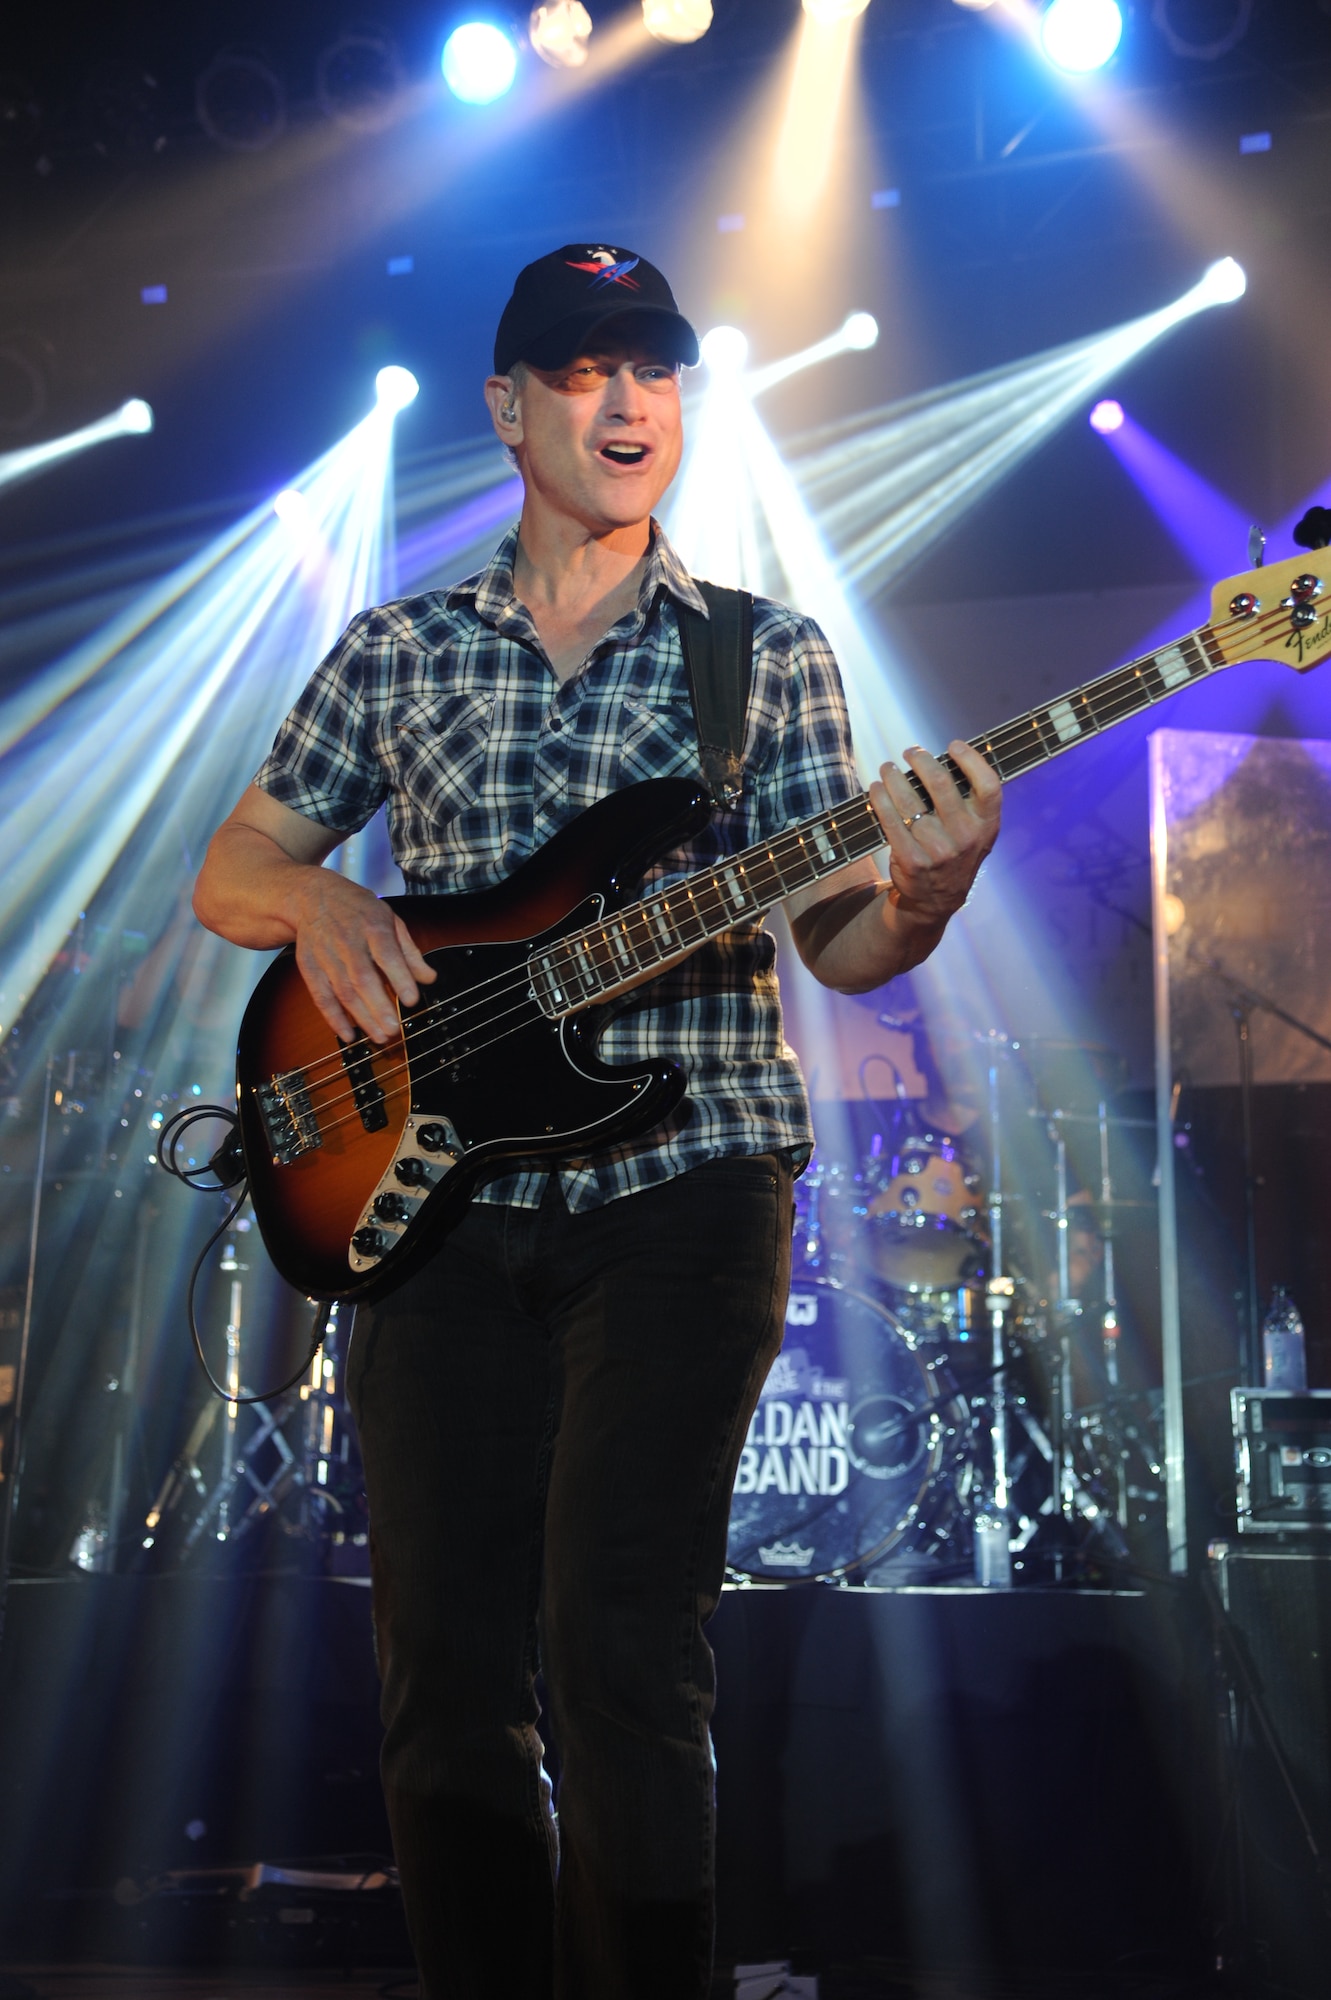 Gary Sinise of Gary Sinise & the Lt. Dan Band plays his electric bass guitar on stage during a concert April 4, 2014, at the Welch Theater, Keesler Air Force Base, Miss.  The band visited Keesler during their morale-boosting 2014 USO tour of U.S. military bases.  They are also a program of the Gary Sinise Foundation, a nonprofit organization that supports and honors national defenders, veterans and first responders. (U.S. Air Force photo by Kemberly Groue)